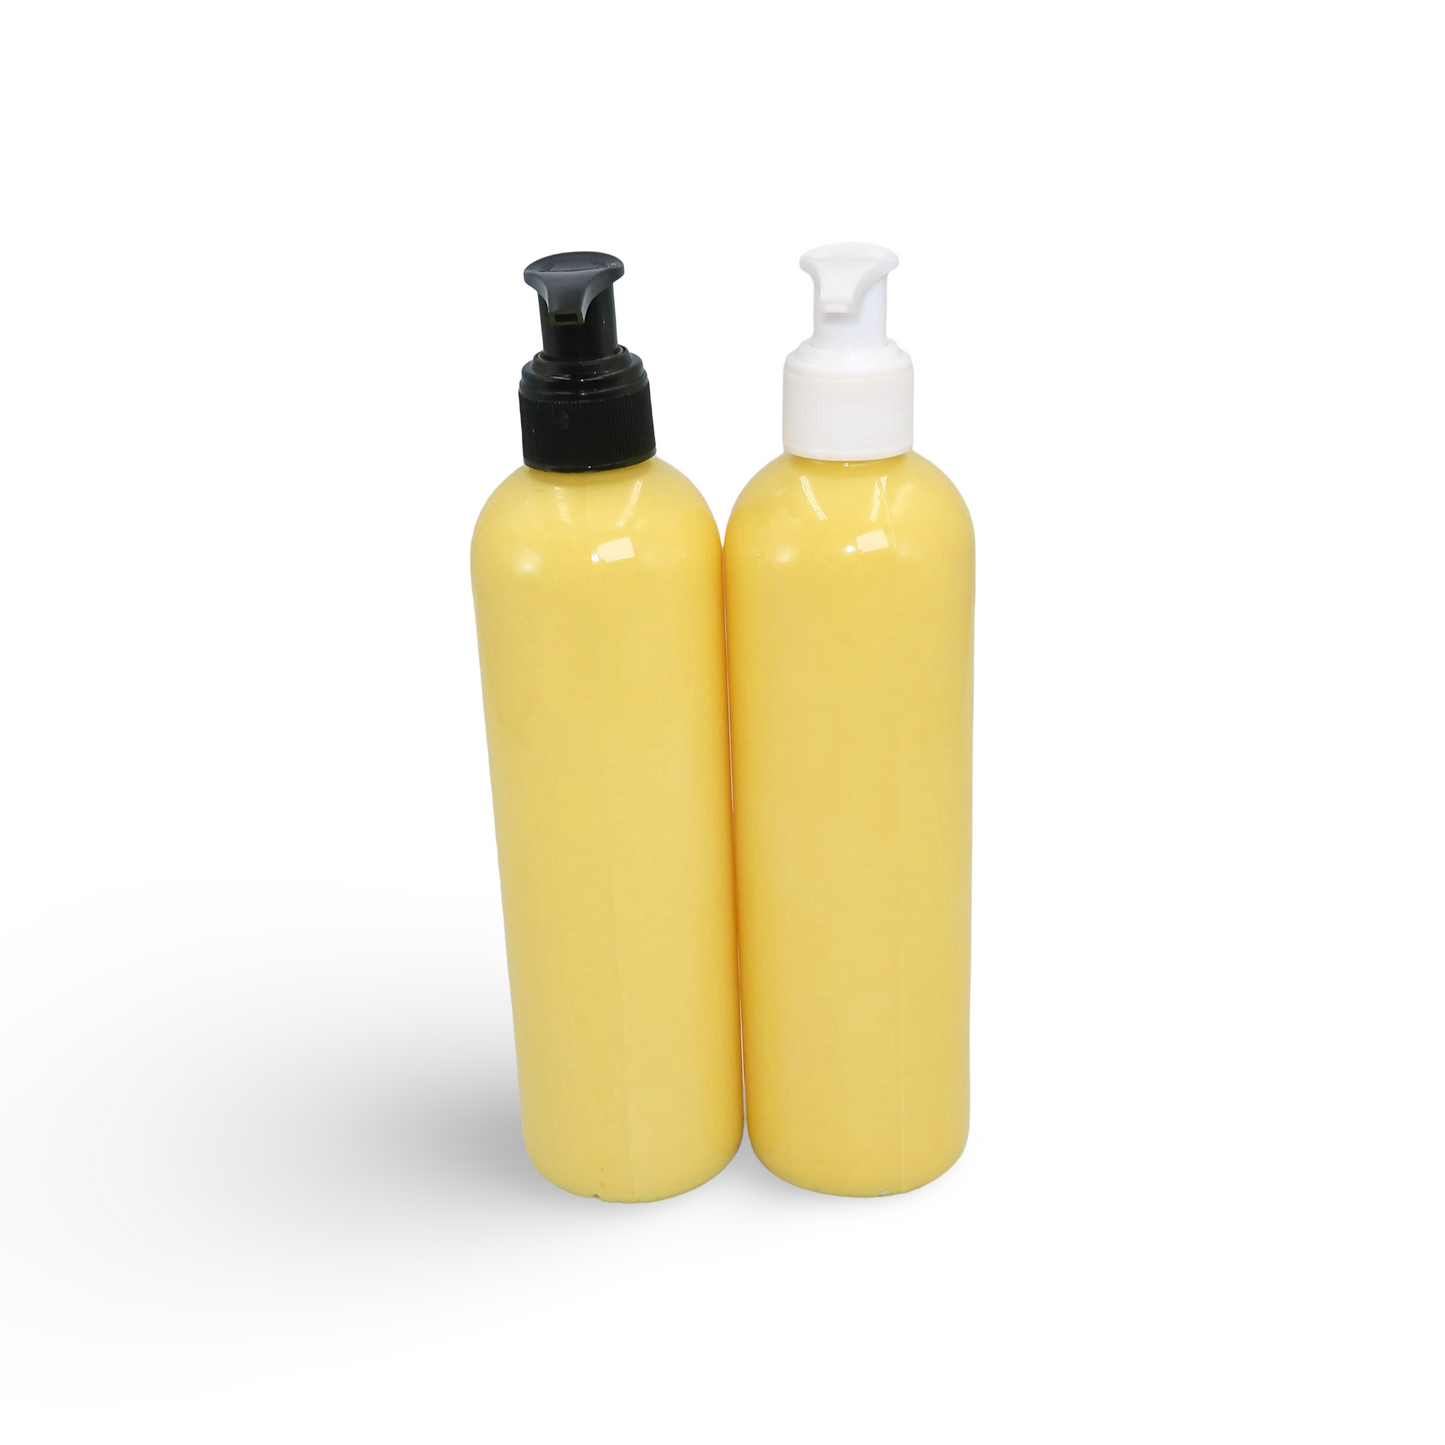 Skin brightening body lotion enriched with turmeric, beta carotene & carrot